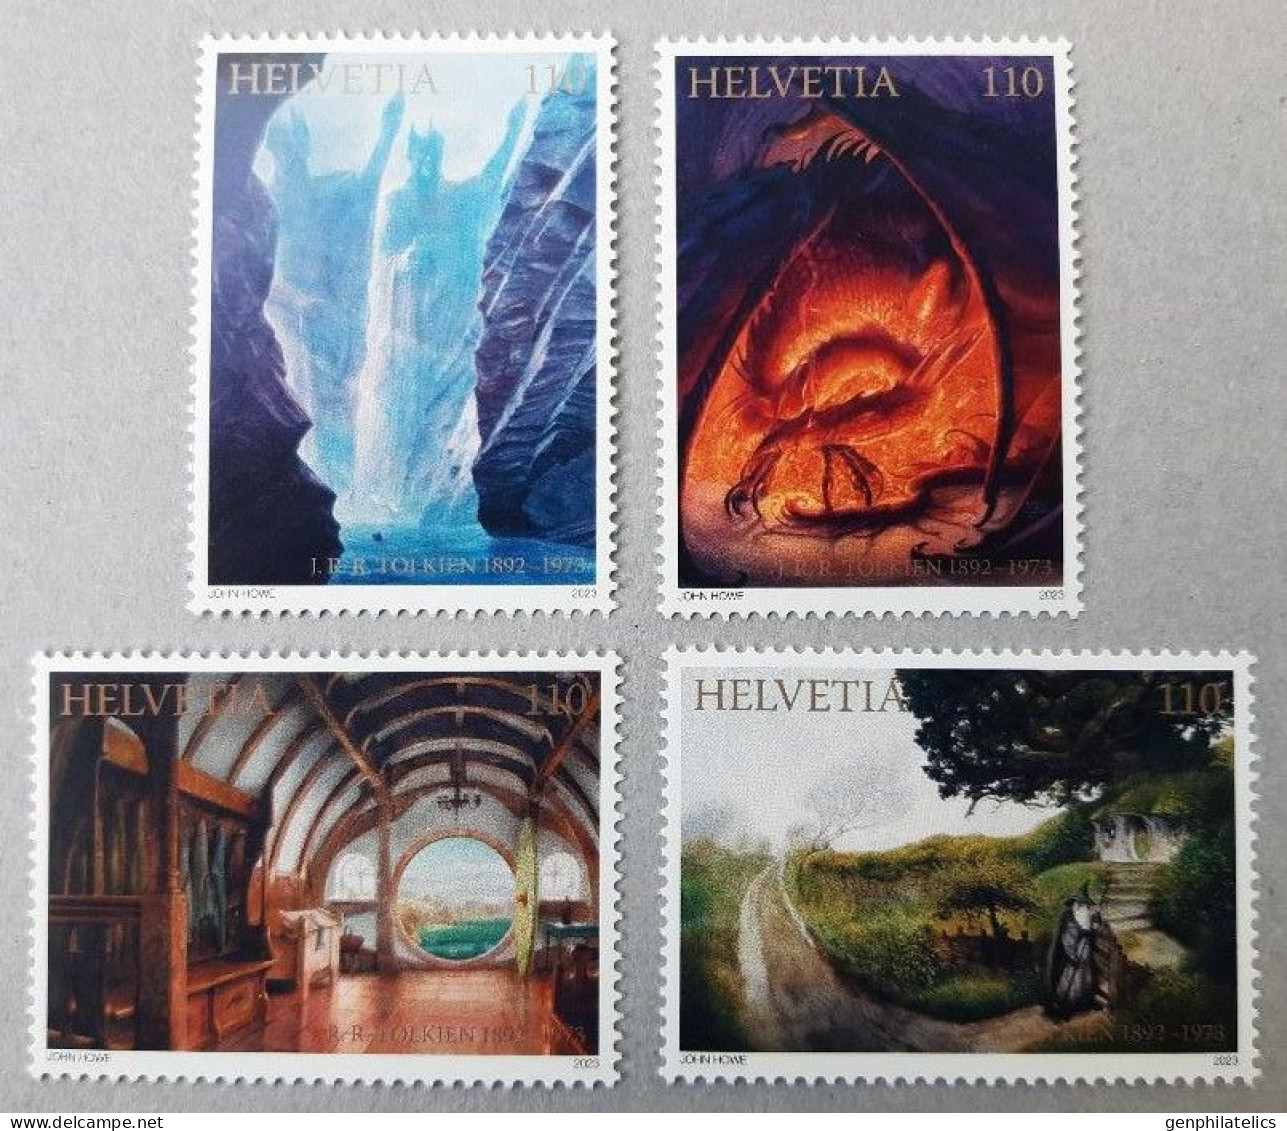 SWITZERLAND 2023 PEOPLE Famous Persons - J.R.R. TOLKIEN - Fine Set (self-adhesive) MNH - Neufs